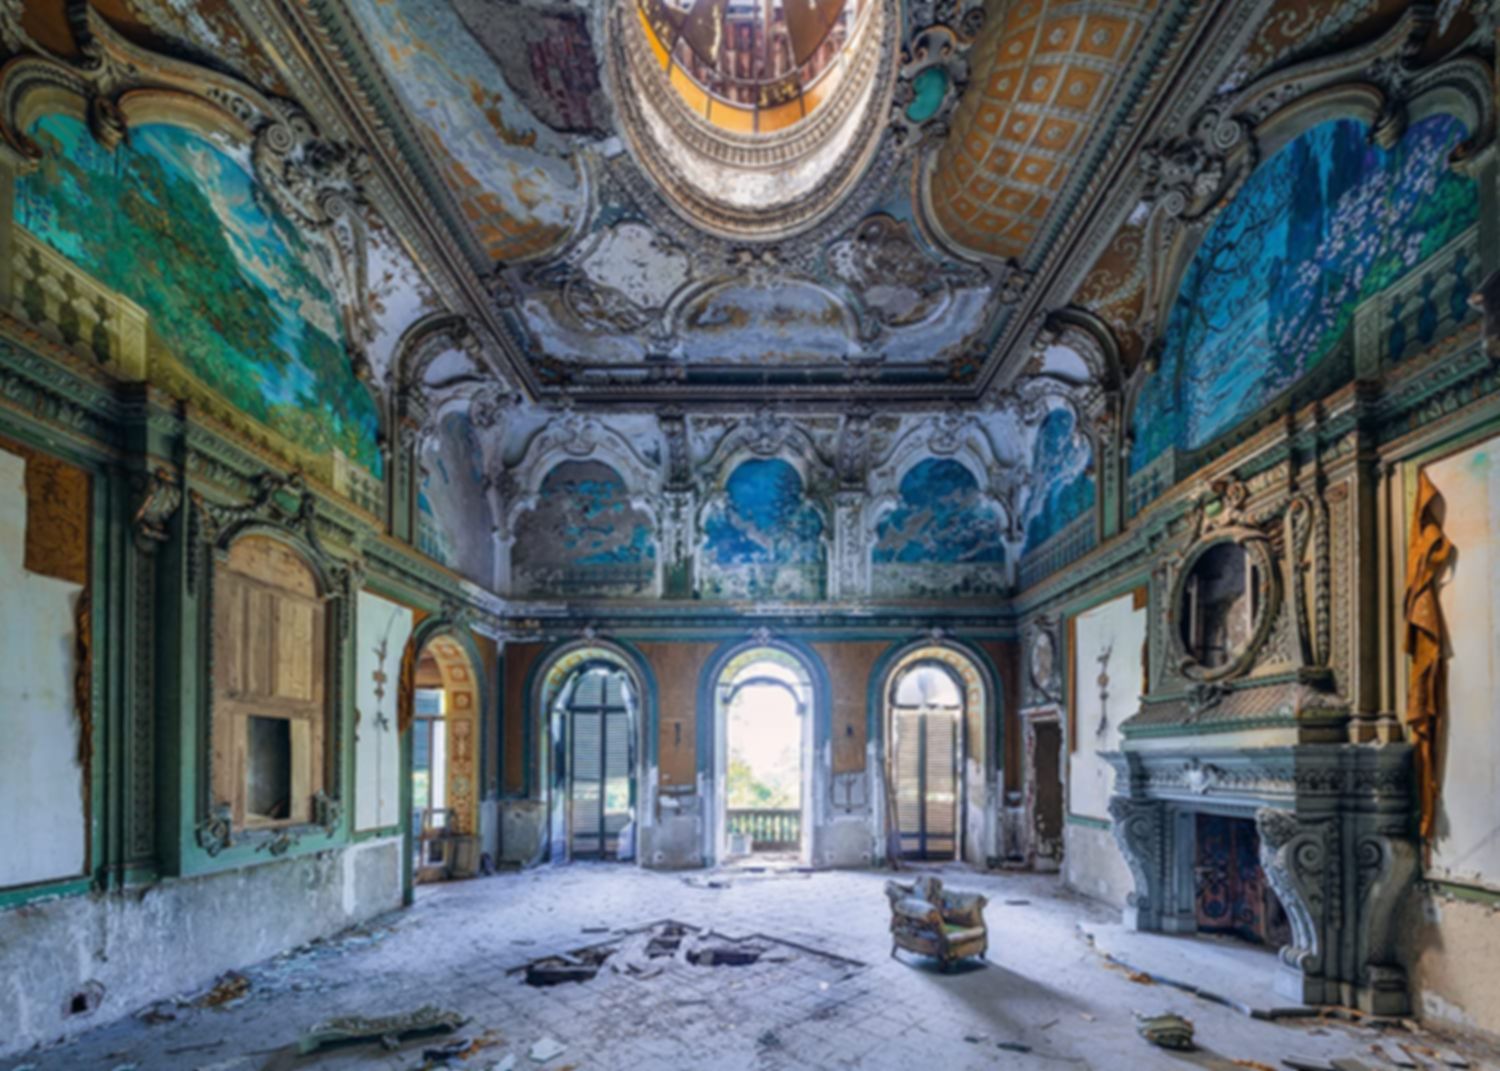 Lost Places - The Palace